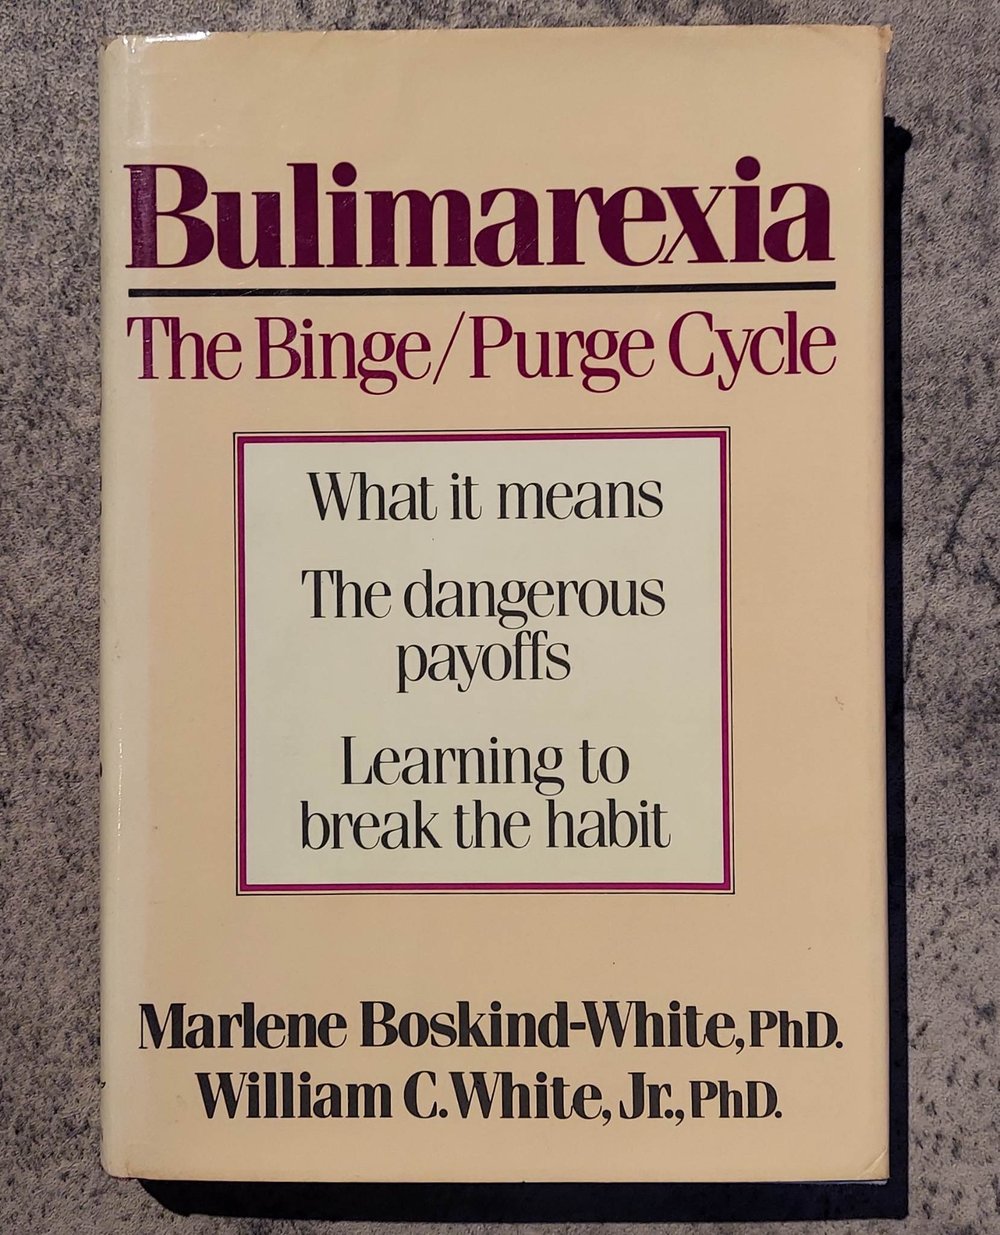 Bulimarexia: The Binge/Purge Cycle, by Marlene Boskind-White and William C. White